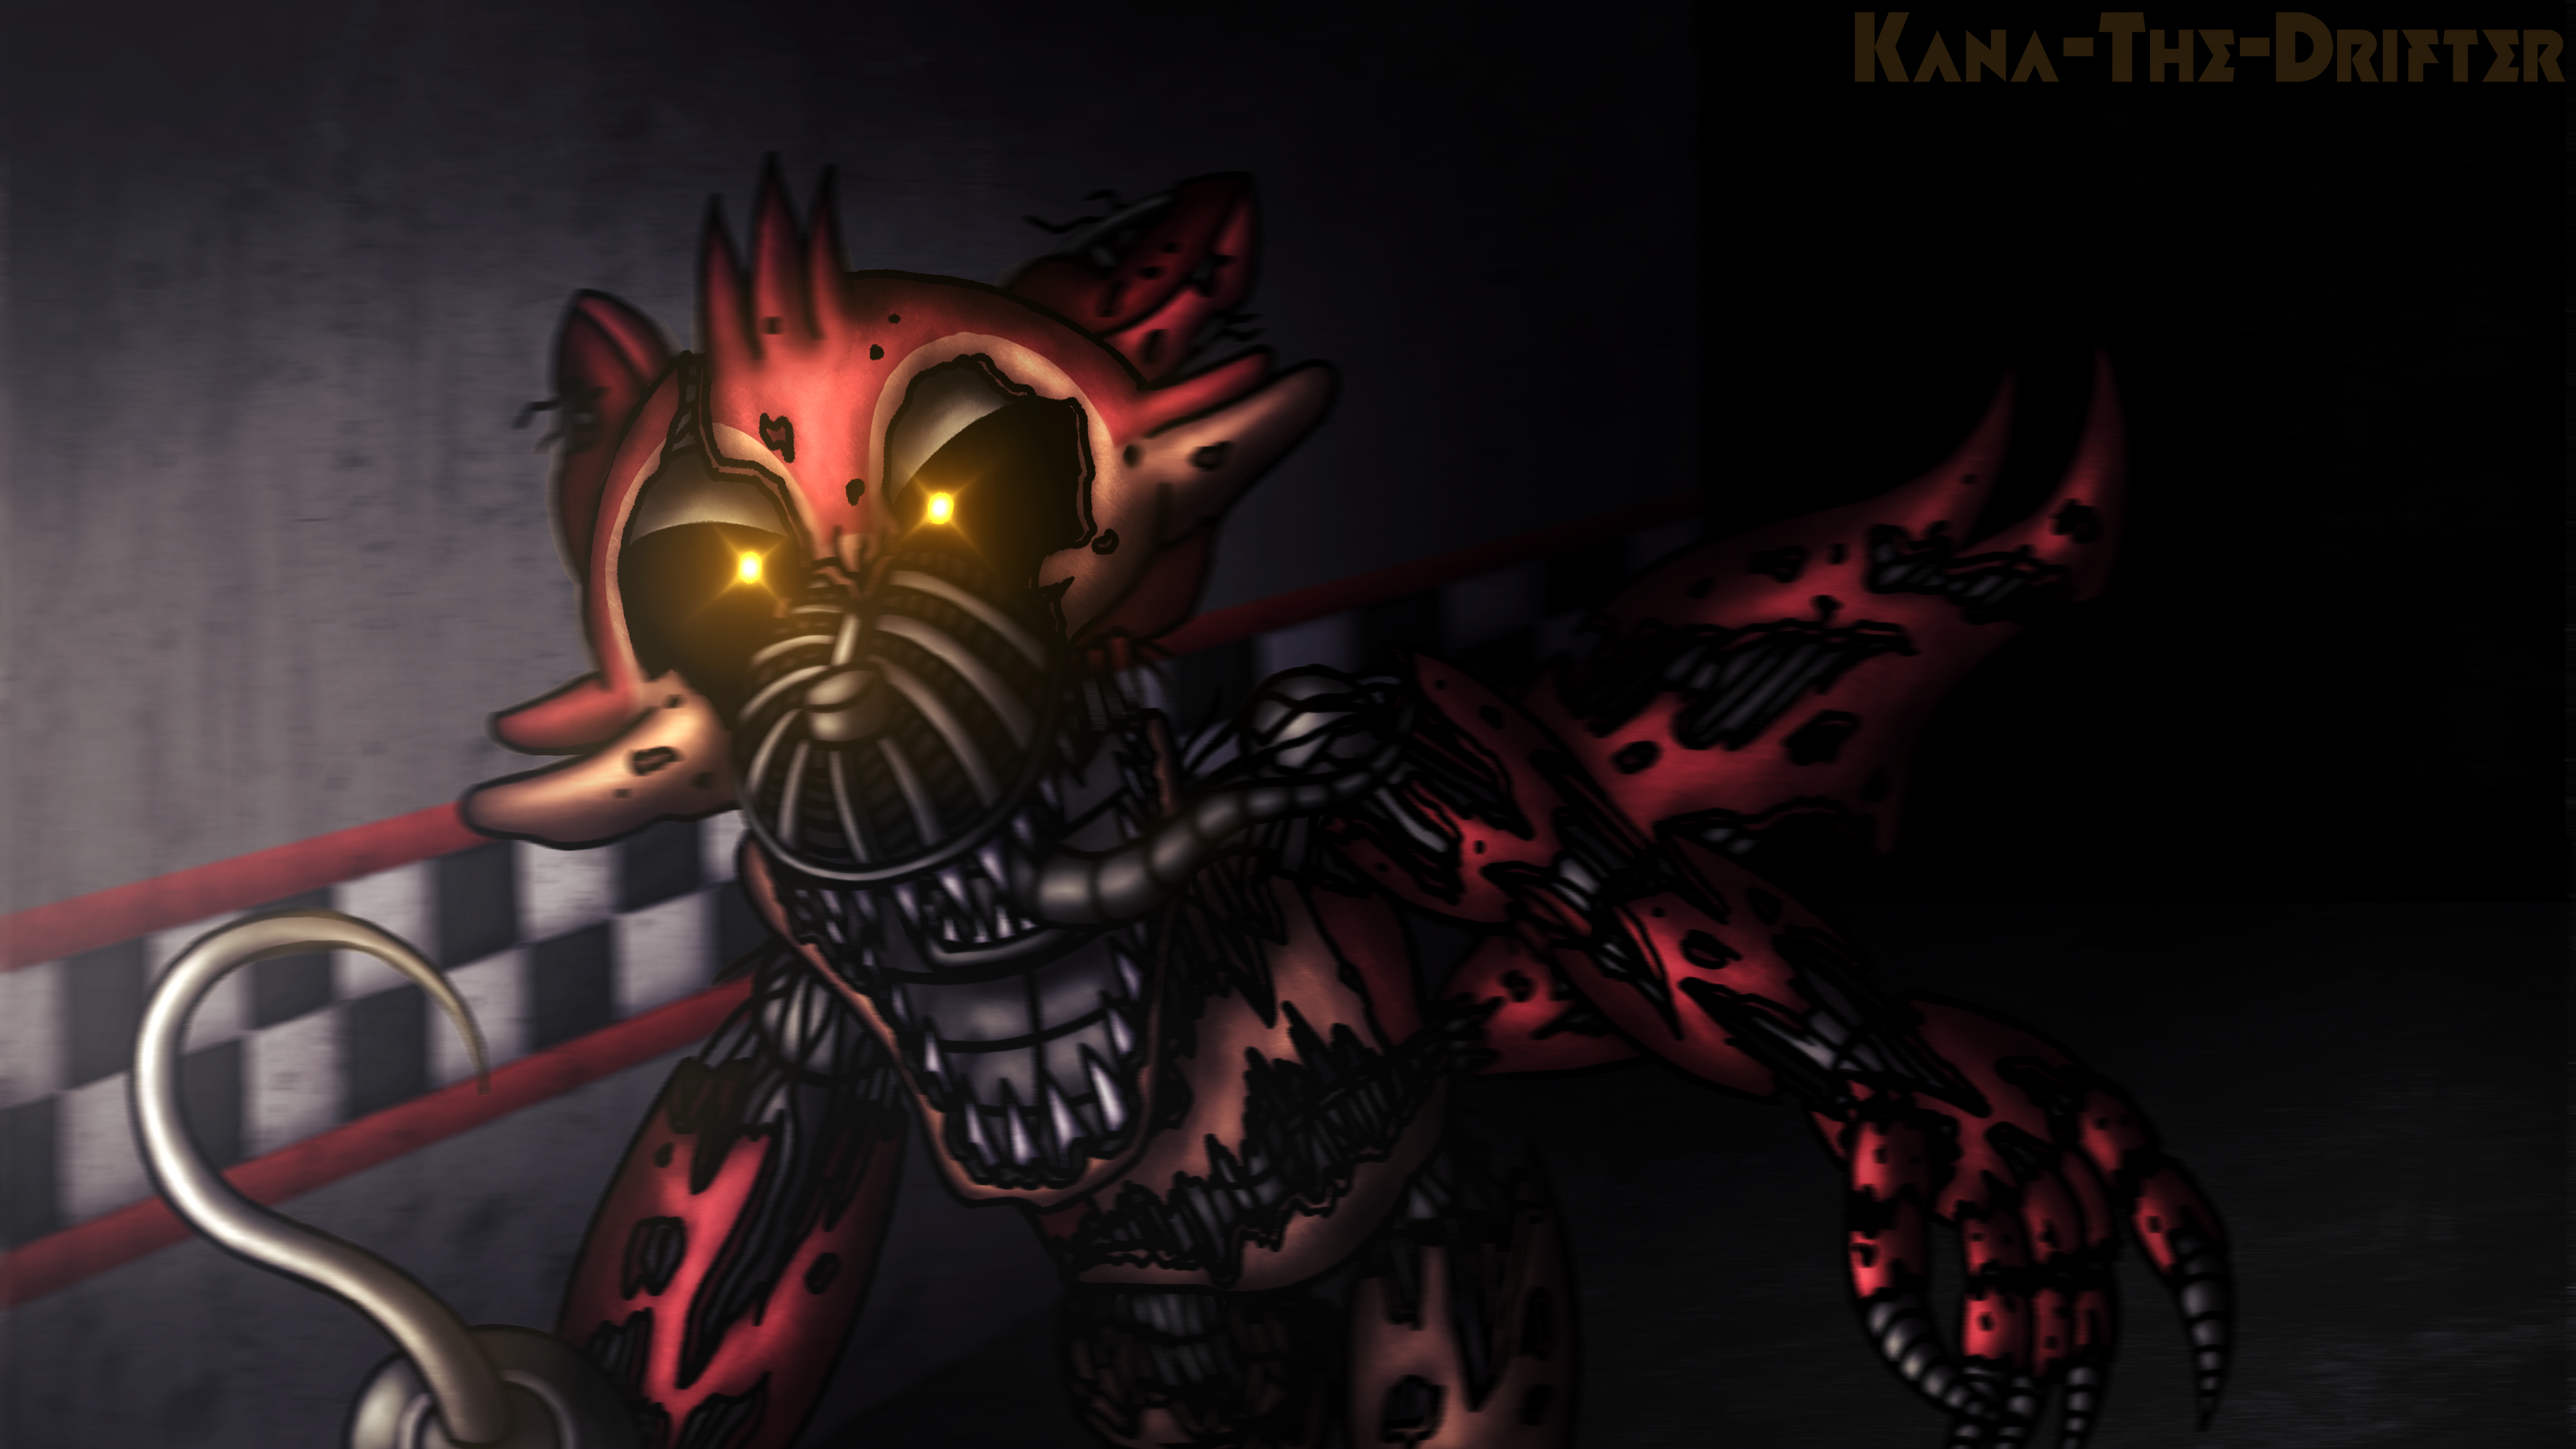 Don't Even Try To Escape (4K FnaF Wallpaper) by Kana-The-Drifter on  DeviantArt